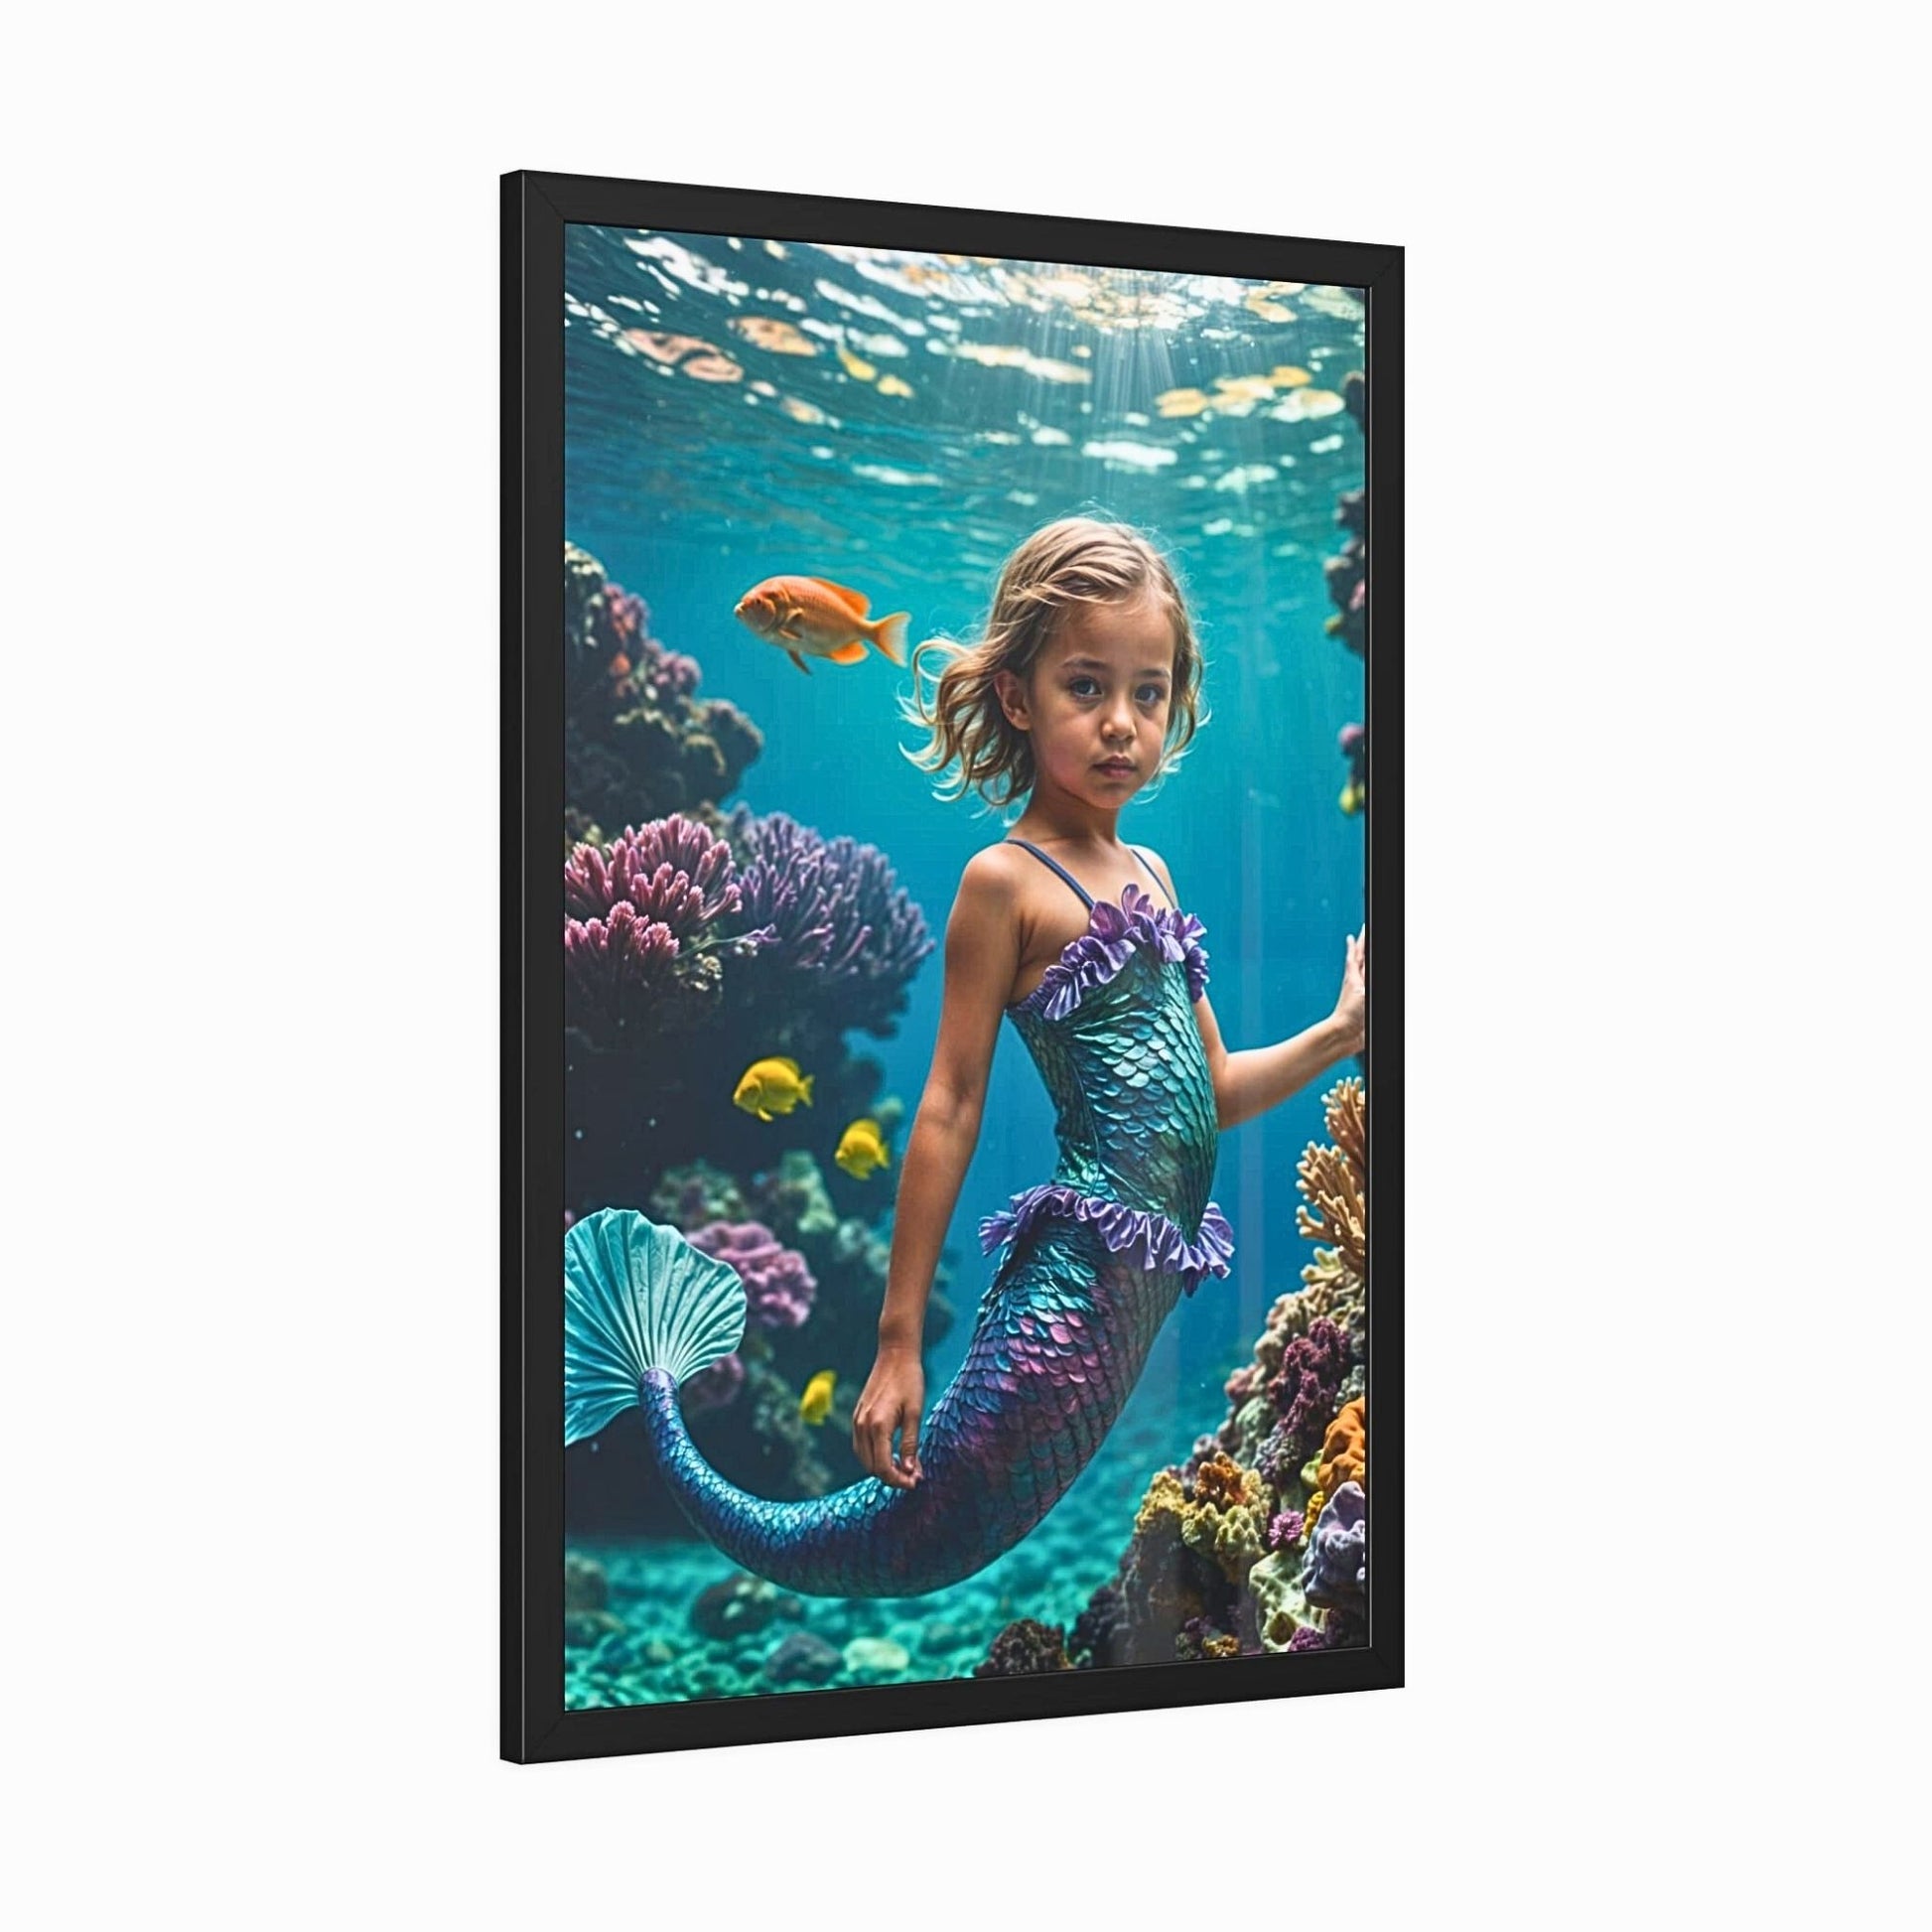 Capture the enchantment of the sea with our Custom Mermaid Portrait from Photo service. Surprise your daughter with a Personalized Princess Mermaid Portrait for her Birthday. Elevate your décor with our exquisite Wall Art options. The perfect gift for daughters, sisters, and moms alike. Create lasting memories with our Custom Mermaid Art portraits.